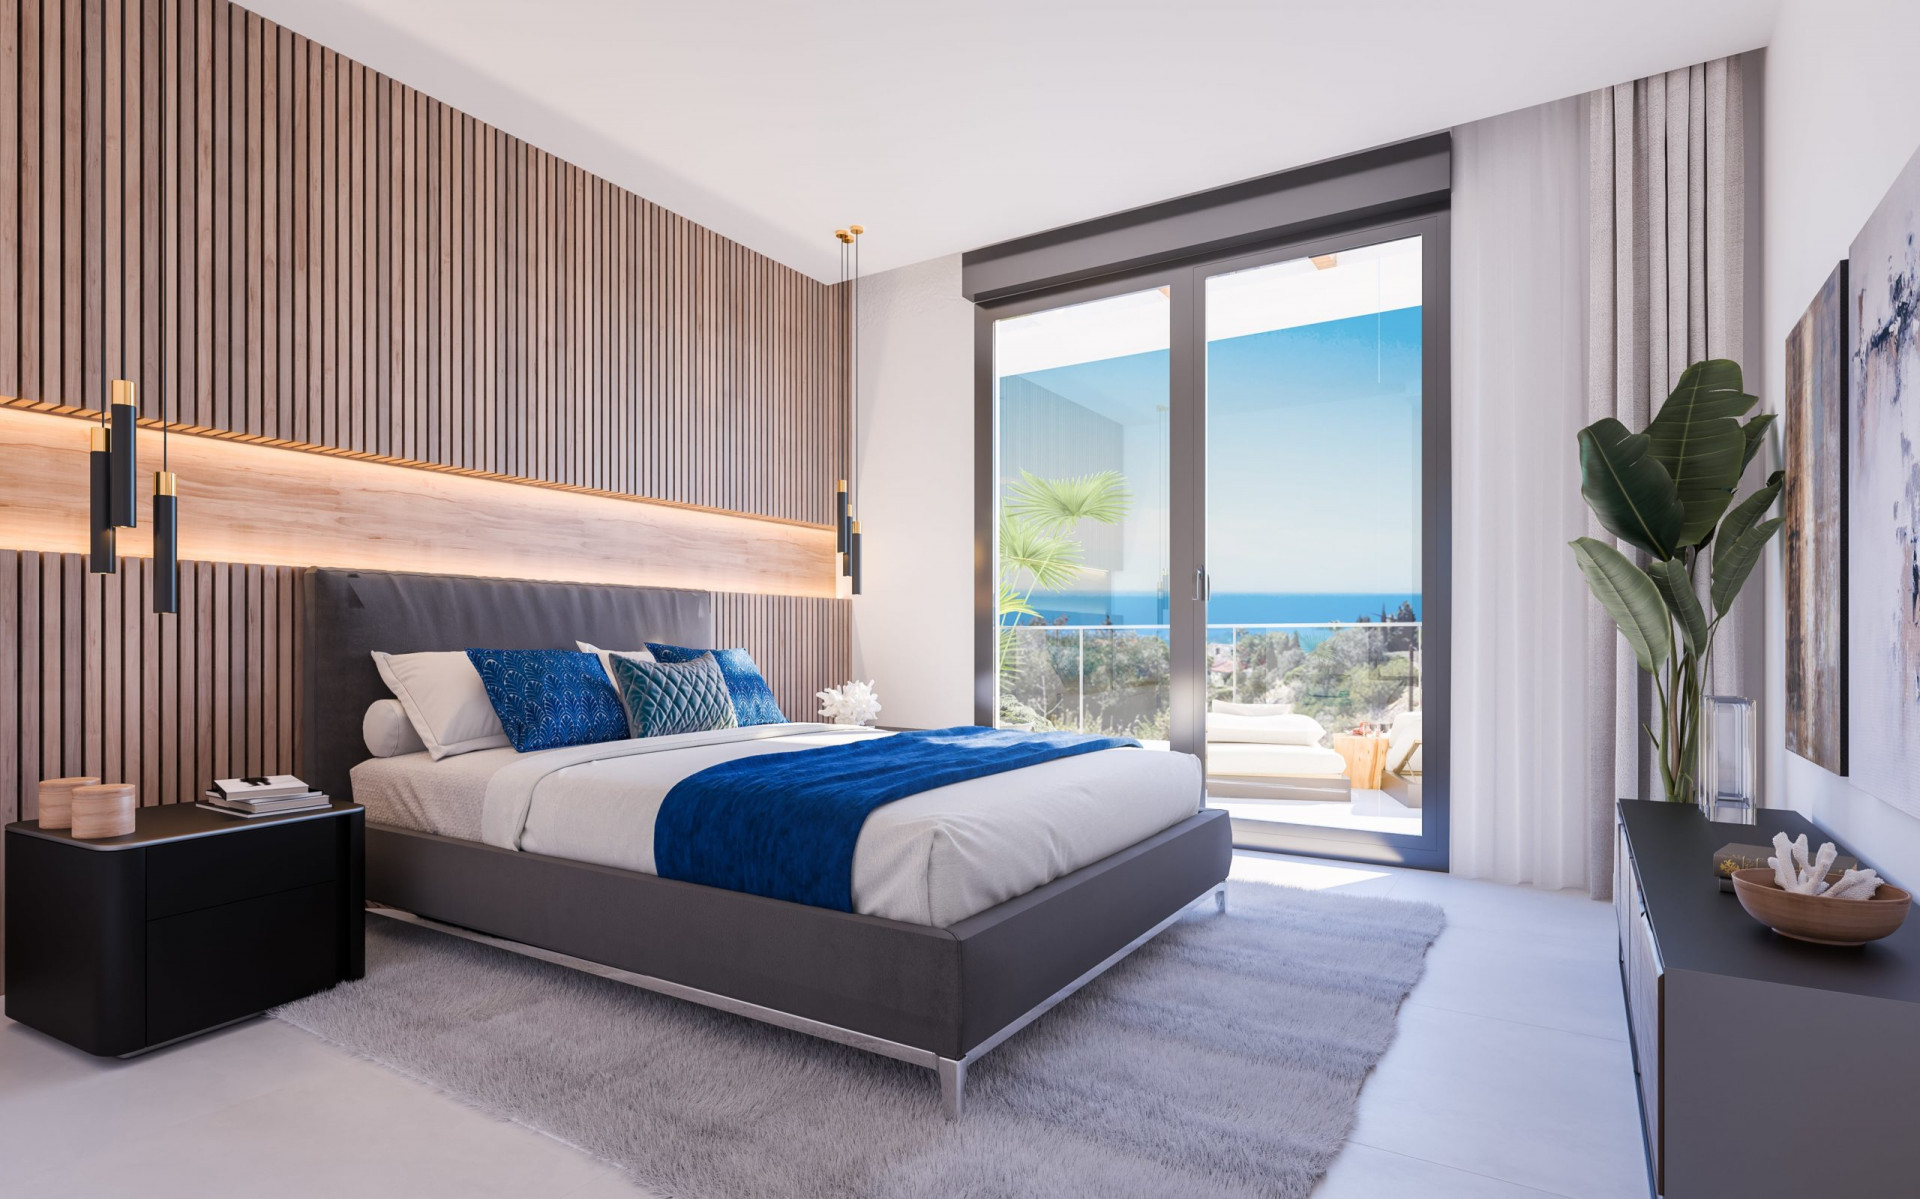 Three bedroom penthouse with solarium and panoramic views of the coastline east of Marbella. | Image 5